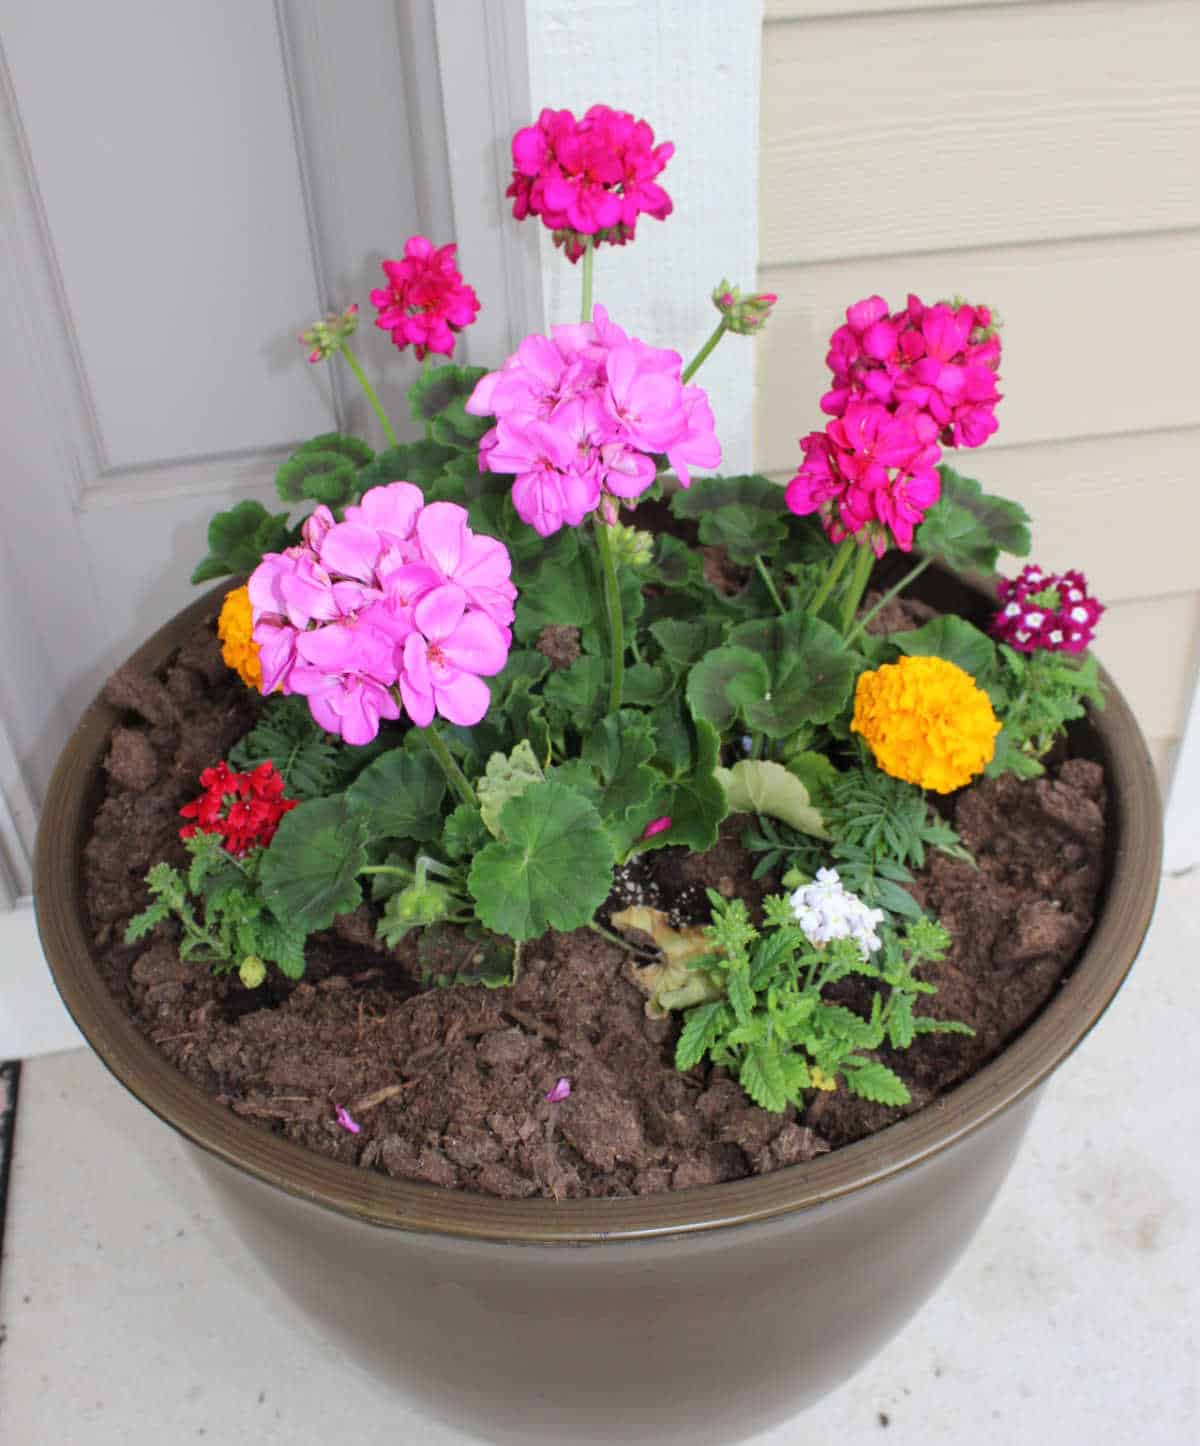 large planter with geraniums, marigolds and alyssum in it.